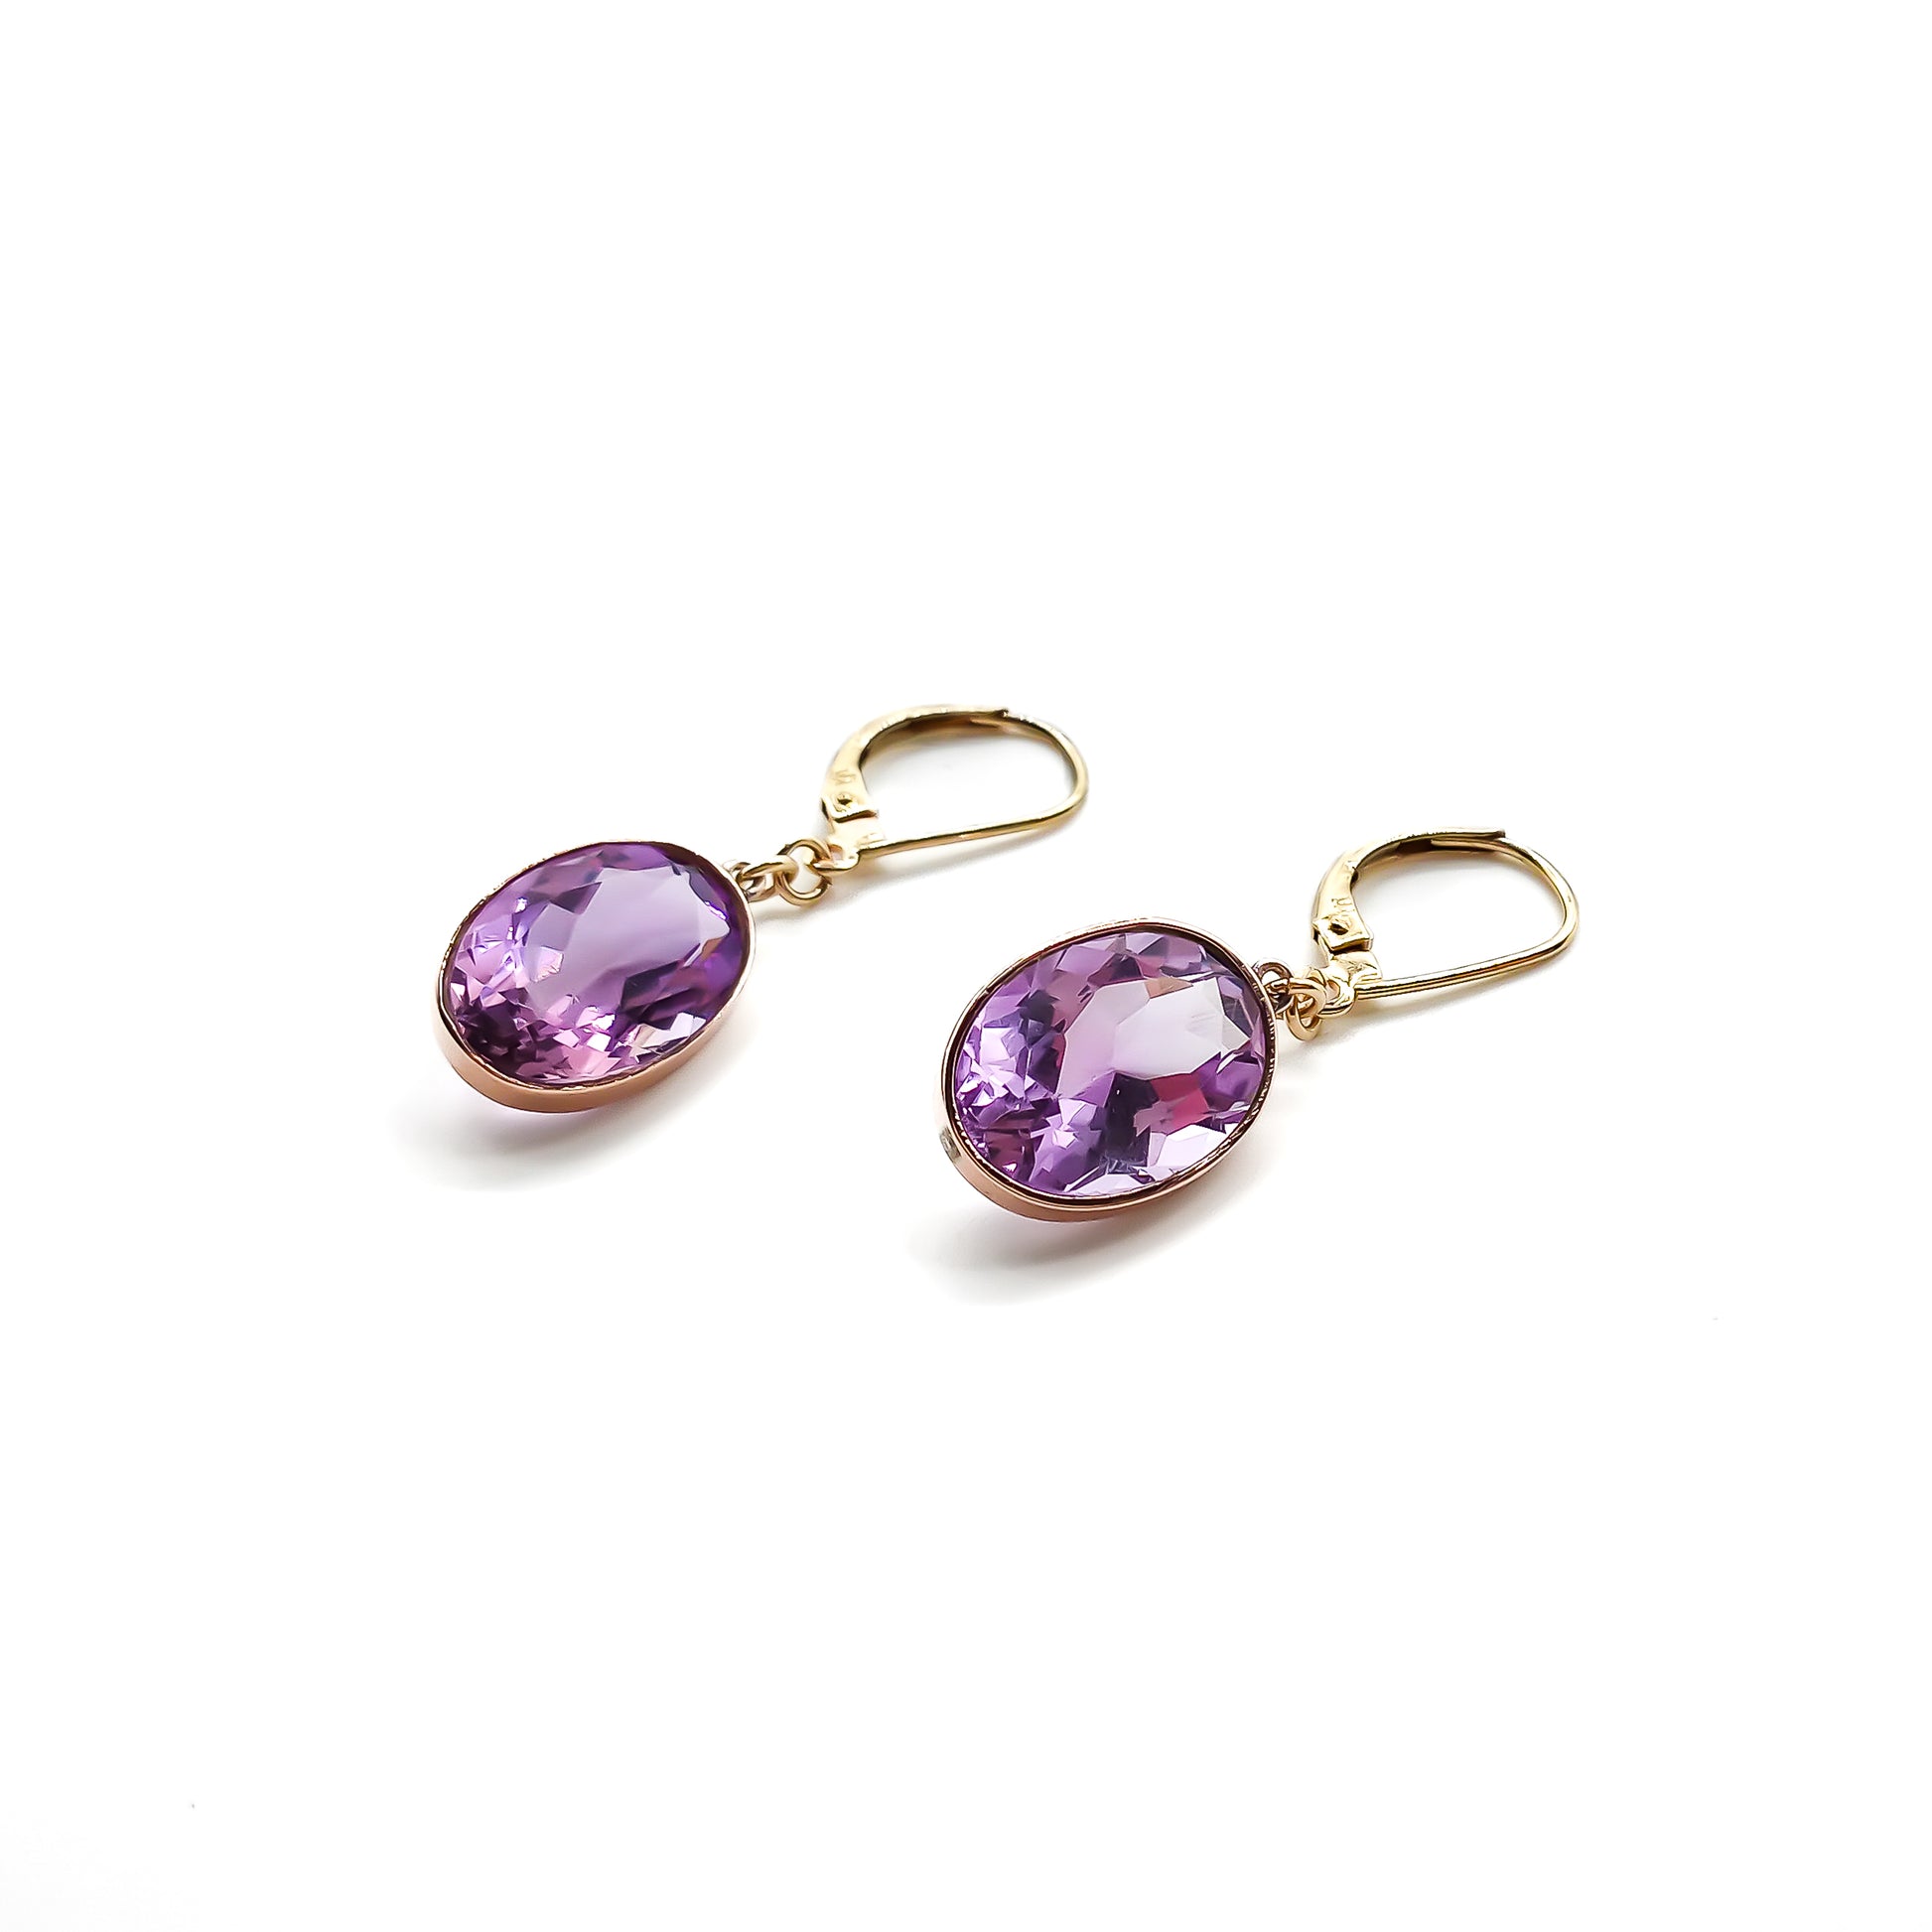 Classic 9ct gold drop earrings set with beautifully faceted oval amethysts.